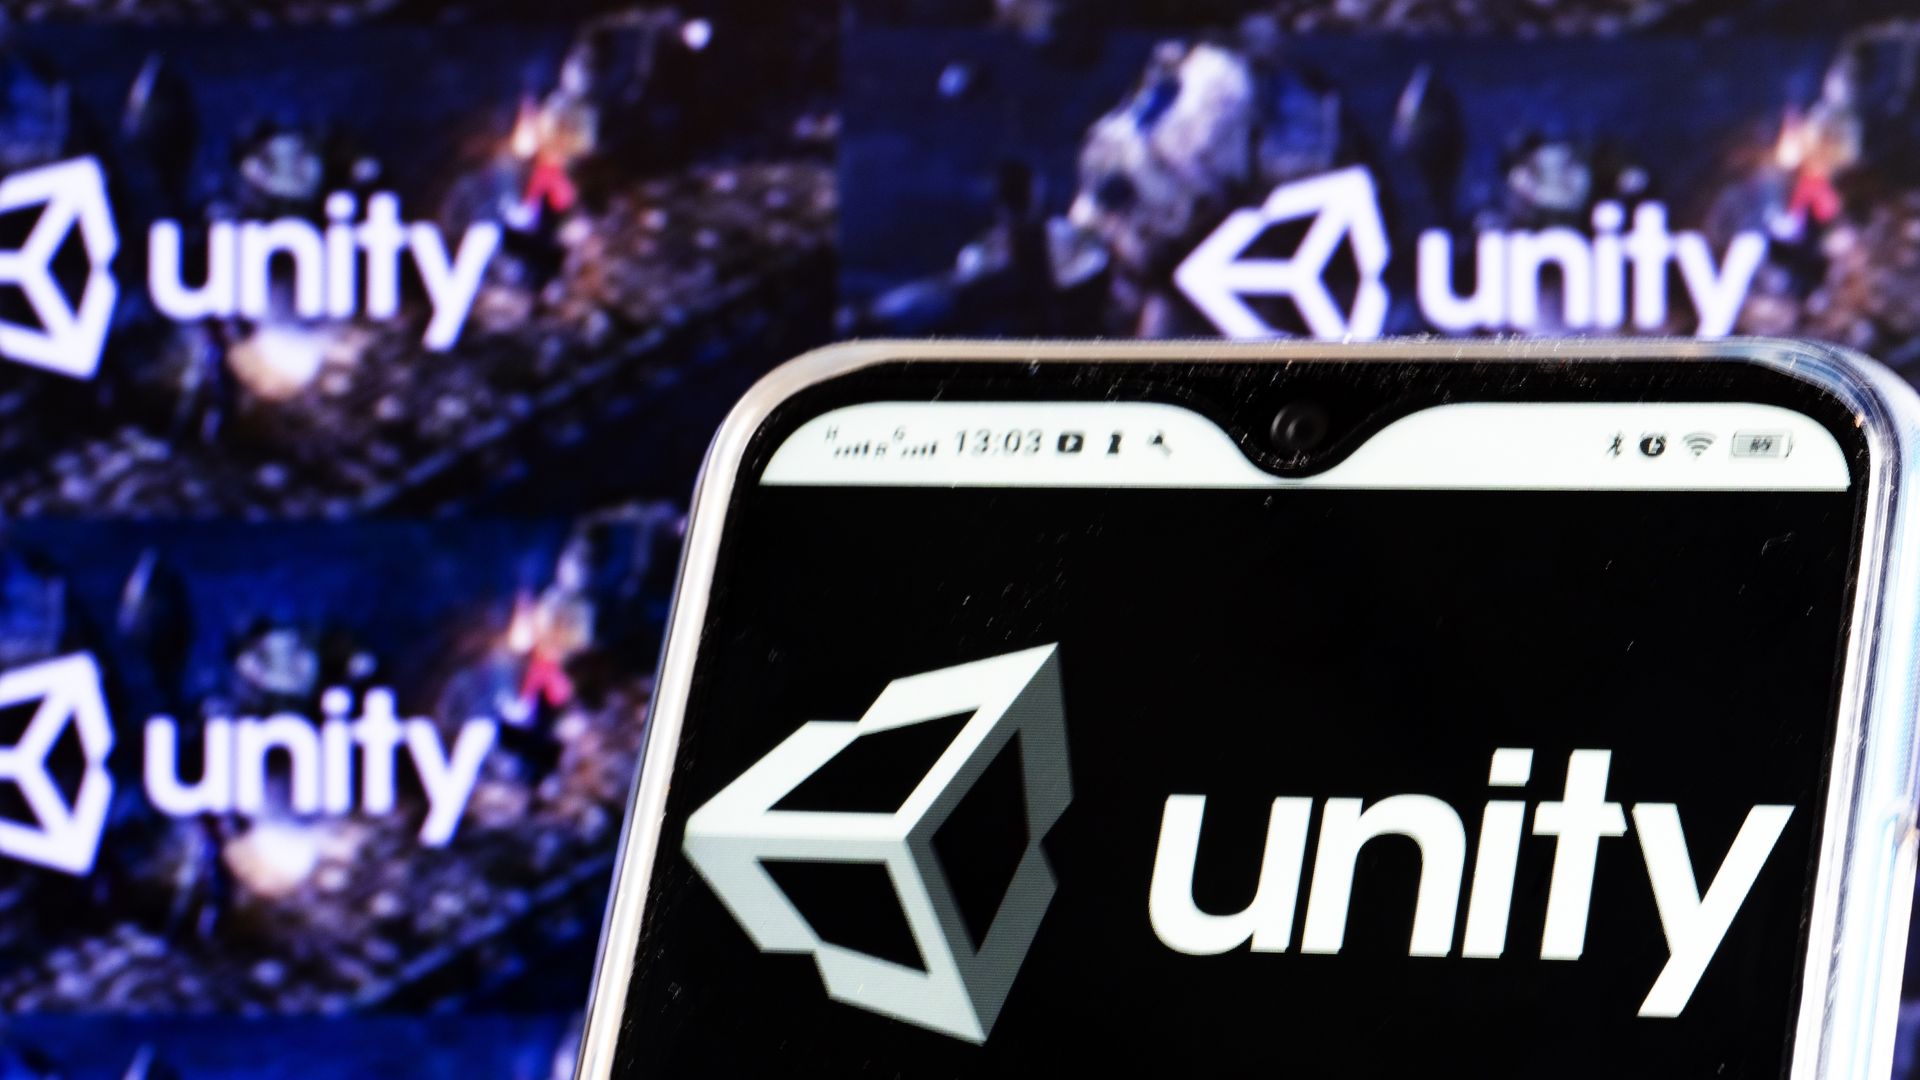 Photo of a phone showing the Unity logo